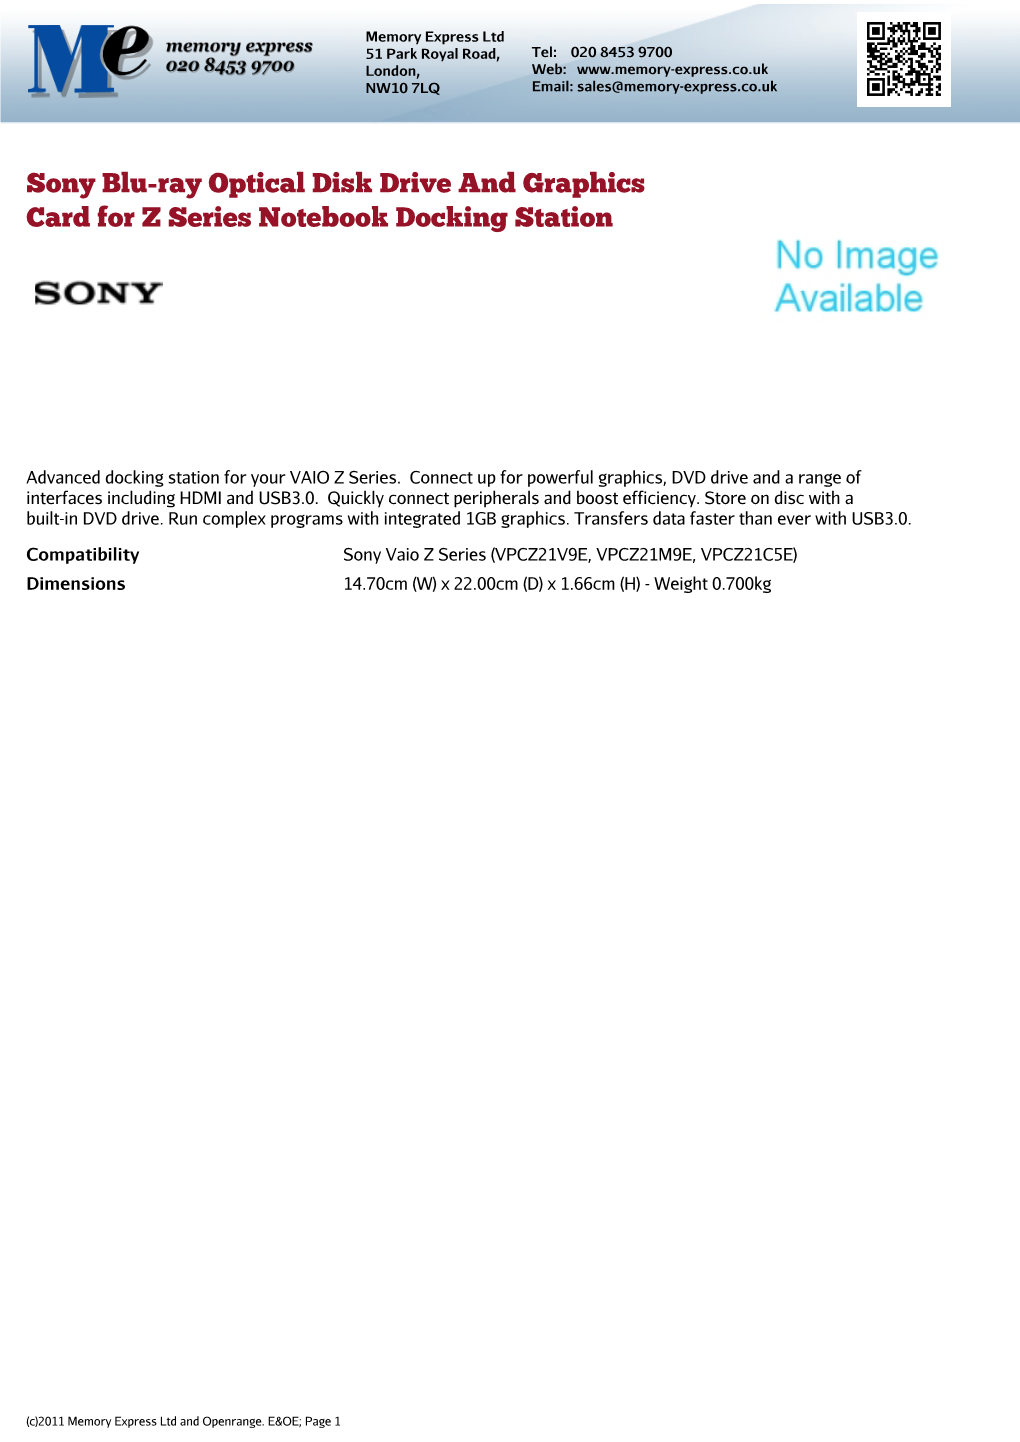 Sony Blu-Ray Optical Disk Drive and Graphics Card for Z Series Notebook Docking Station